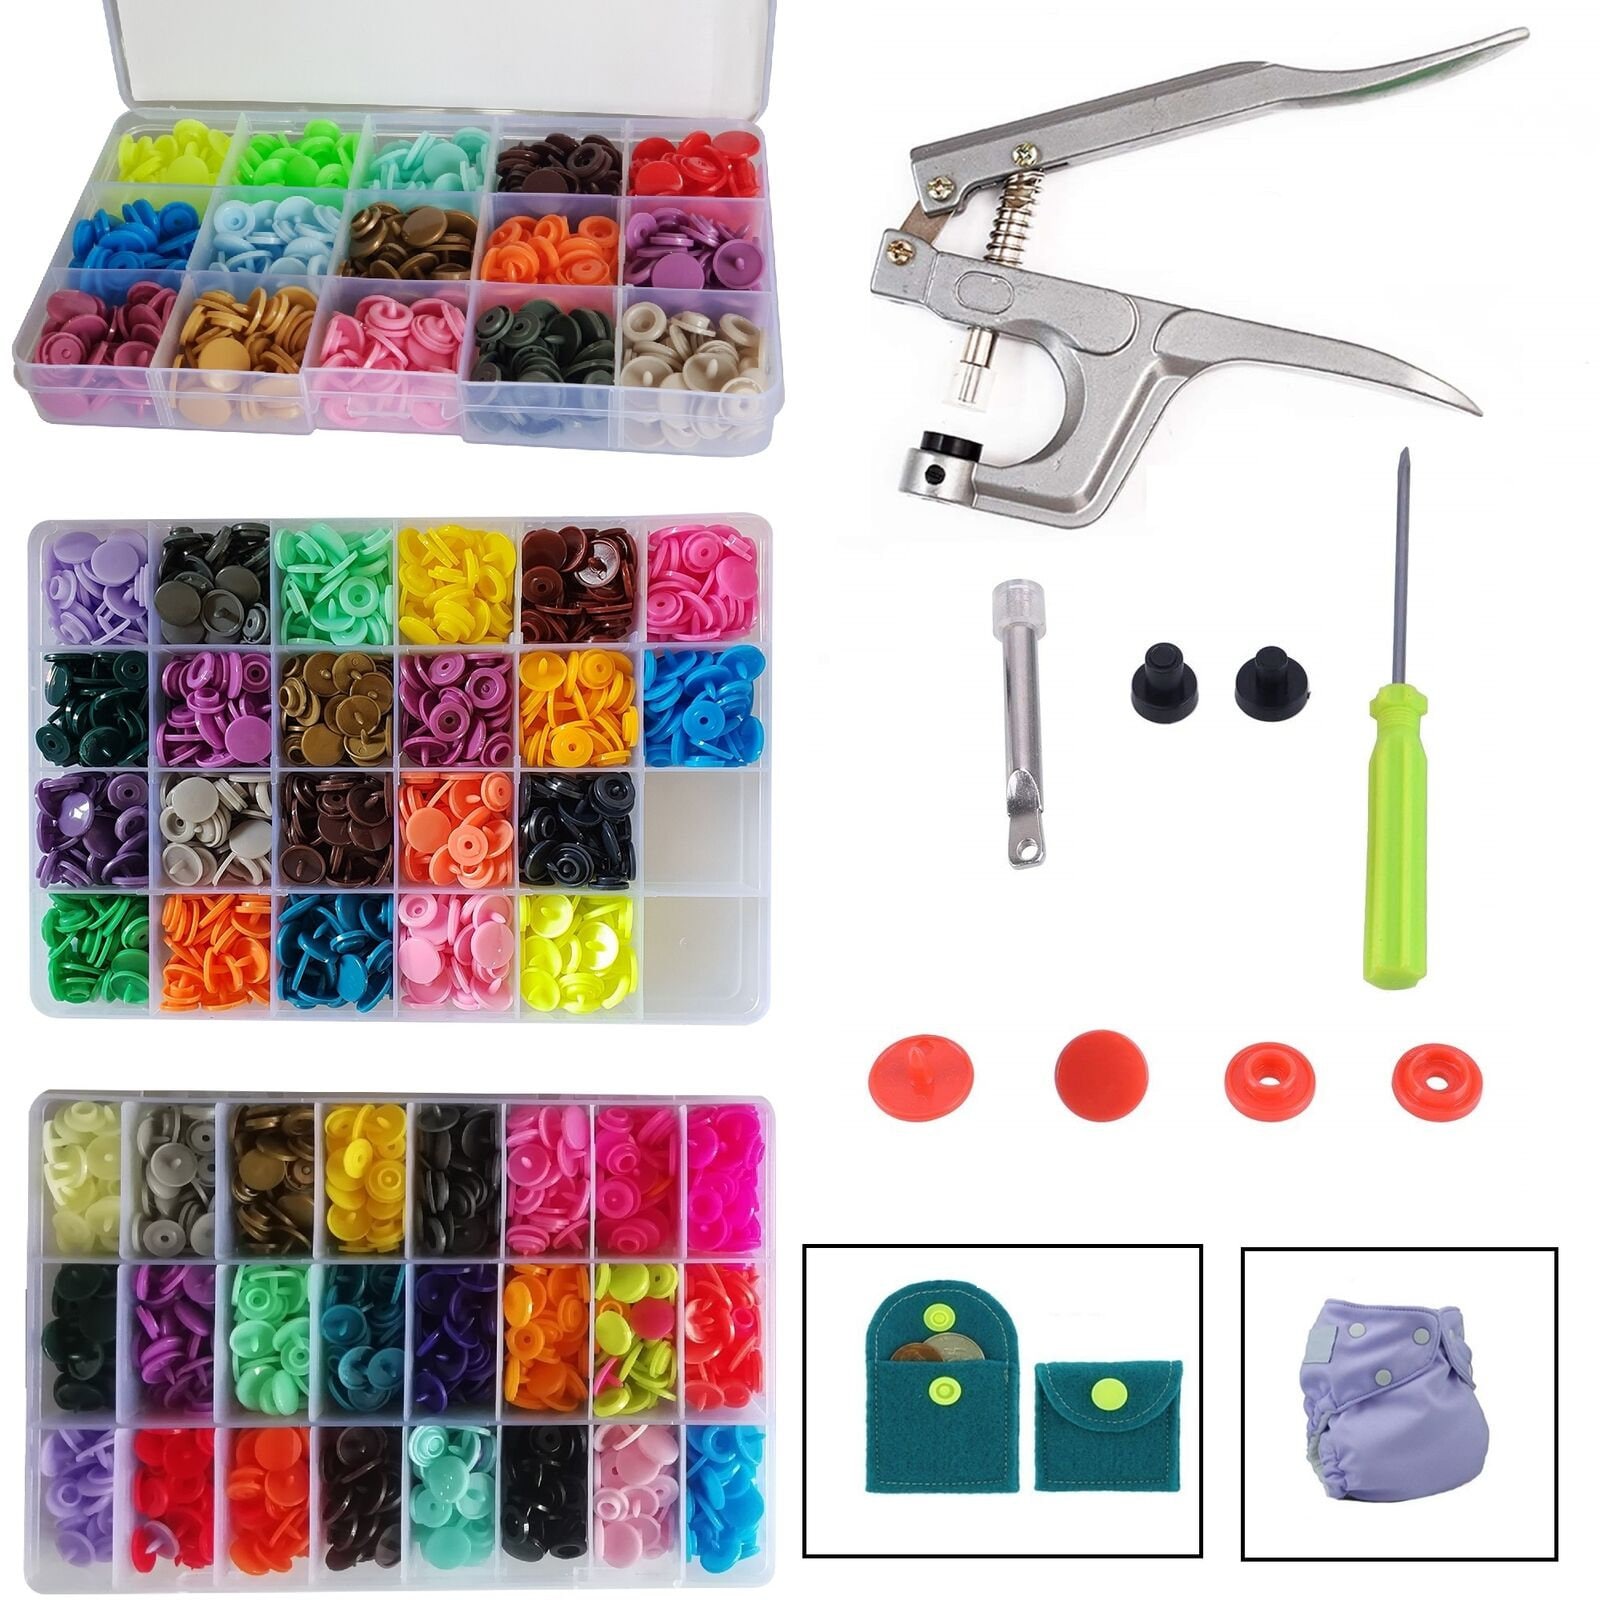 50sets Metal Snap Fasteners Press Studs Snap Buttons Poppers 10mm